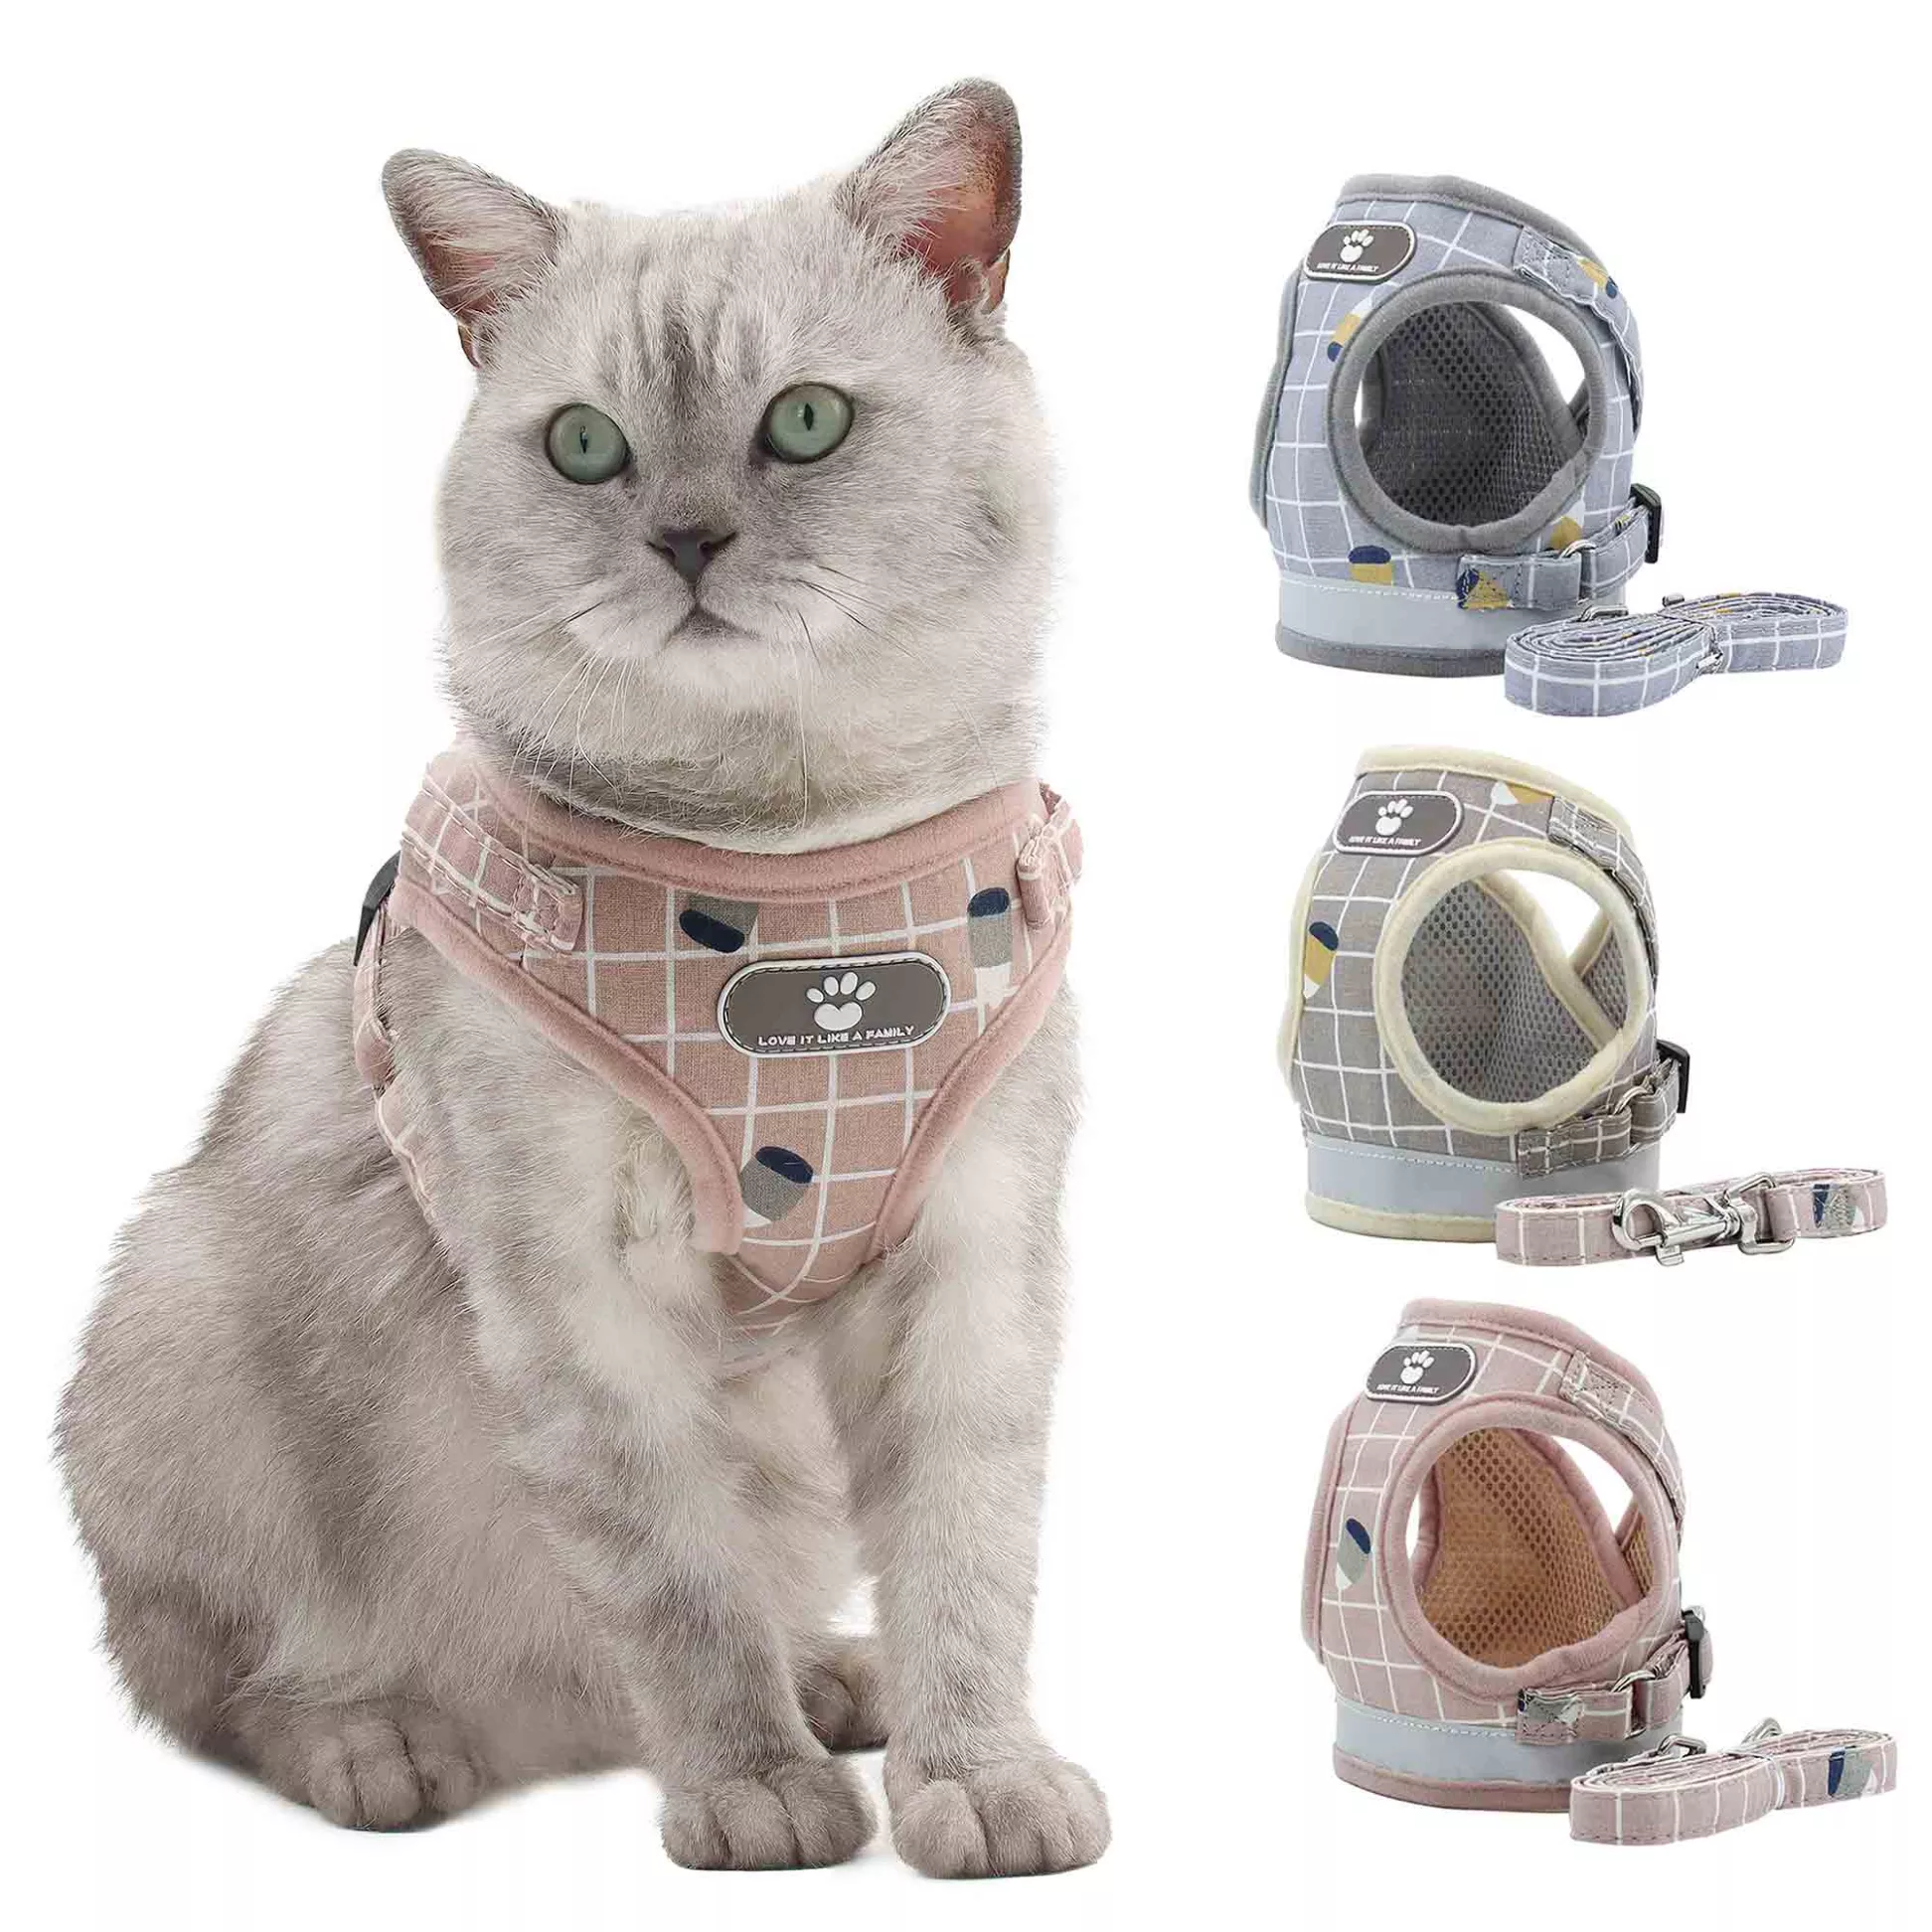 What is Personalized CAT COLLAR？